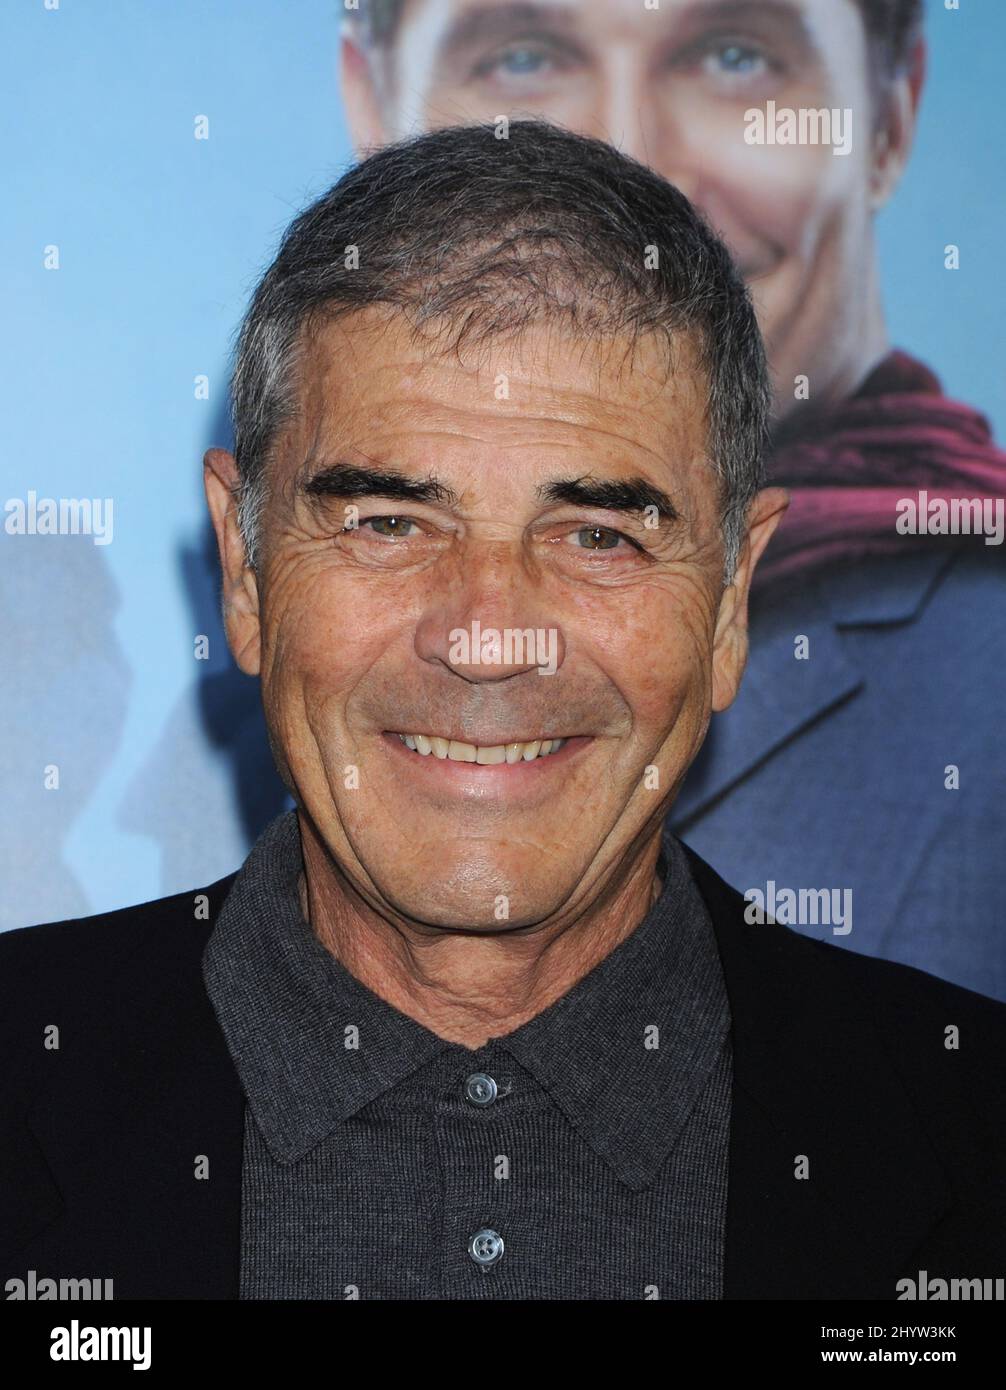 Robert Forster at the 'Ghosts of Girlfriends Past' World Premiere held at Grauman's Chinese Theatre, Hollywood, USA. Stock Photo